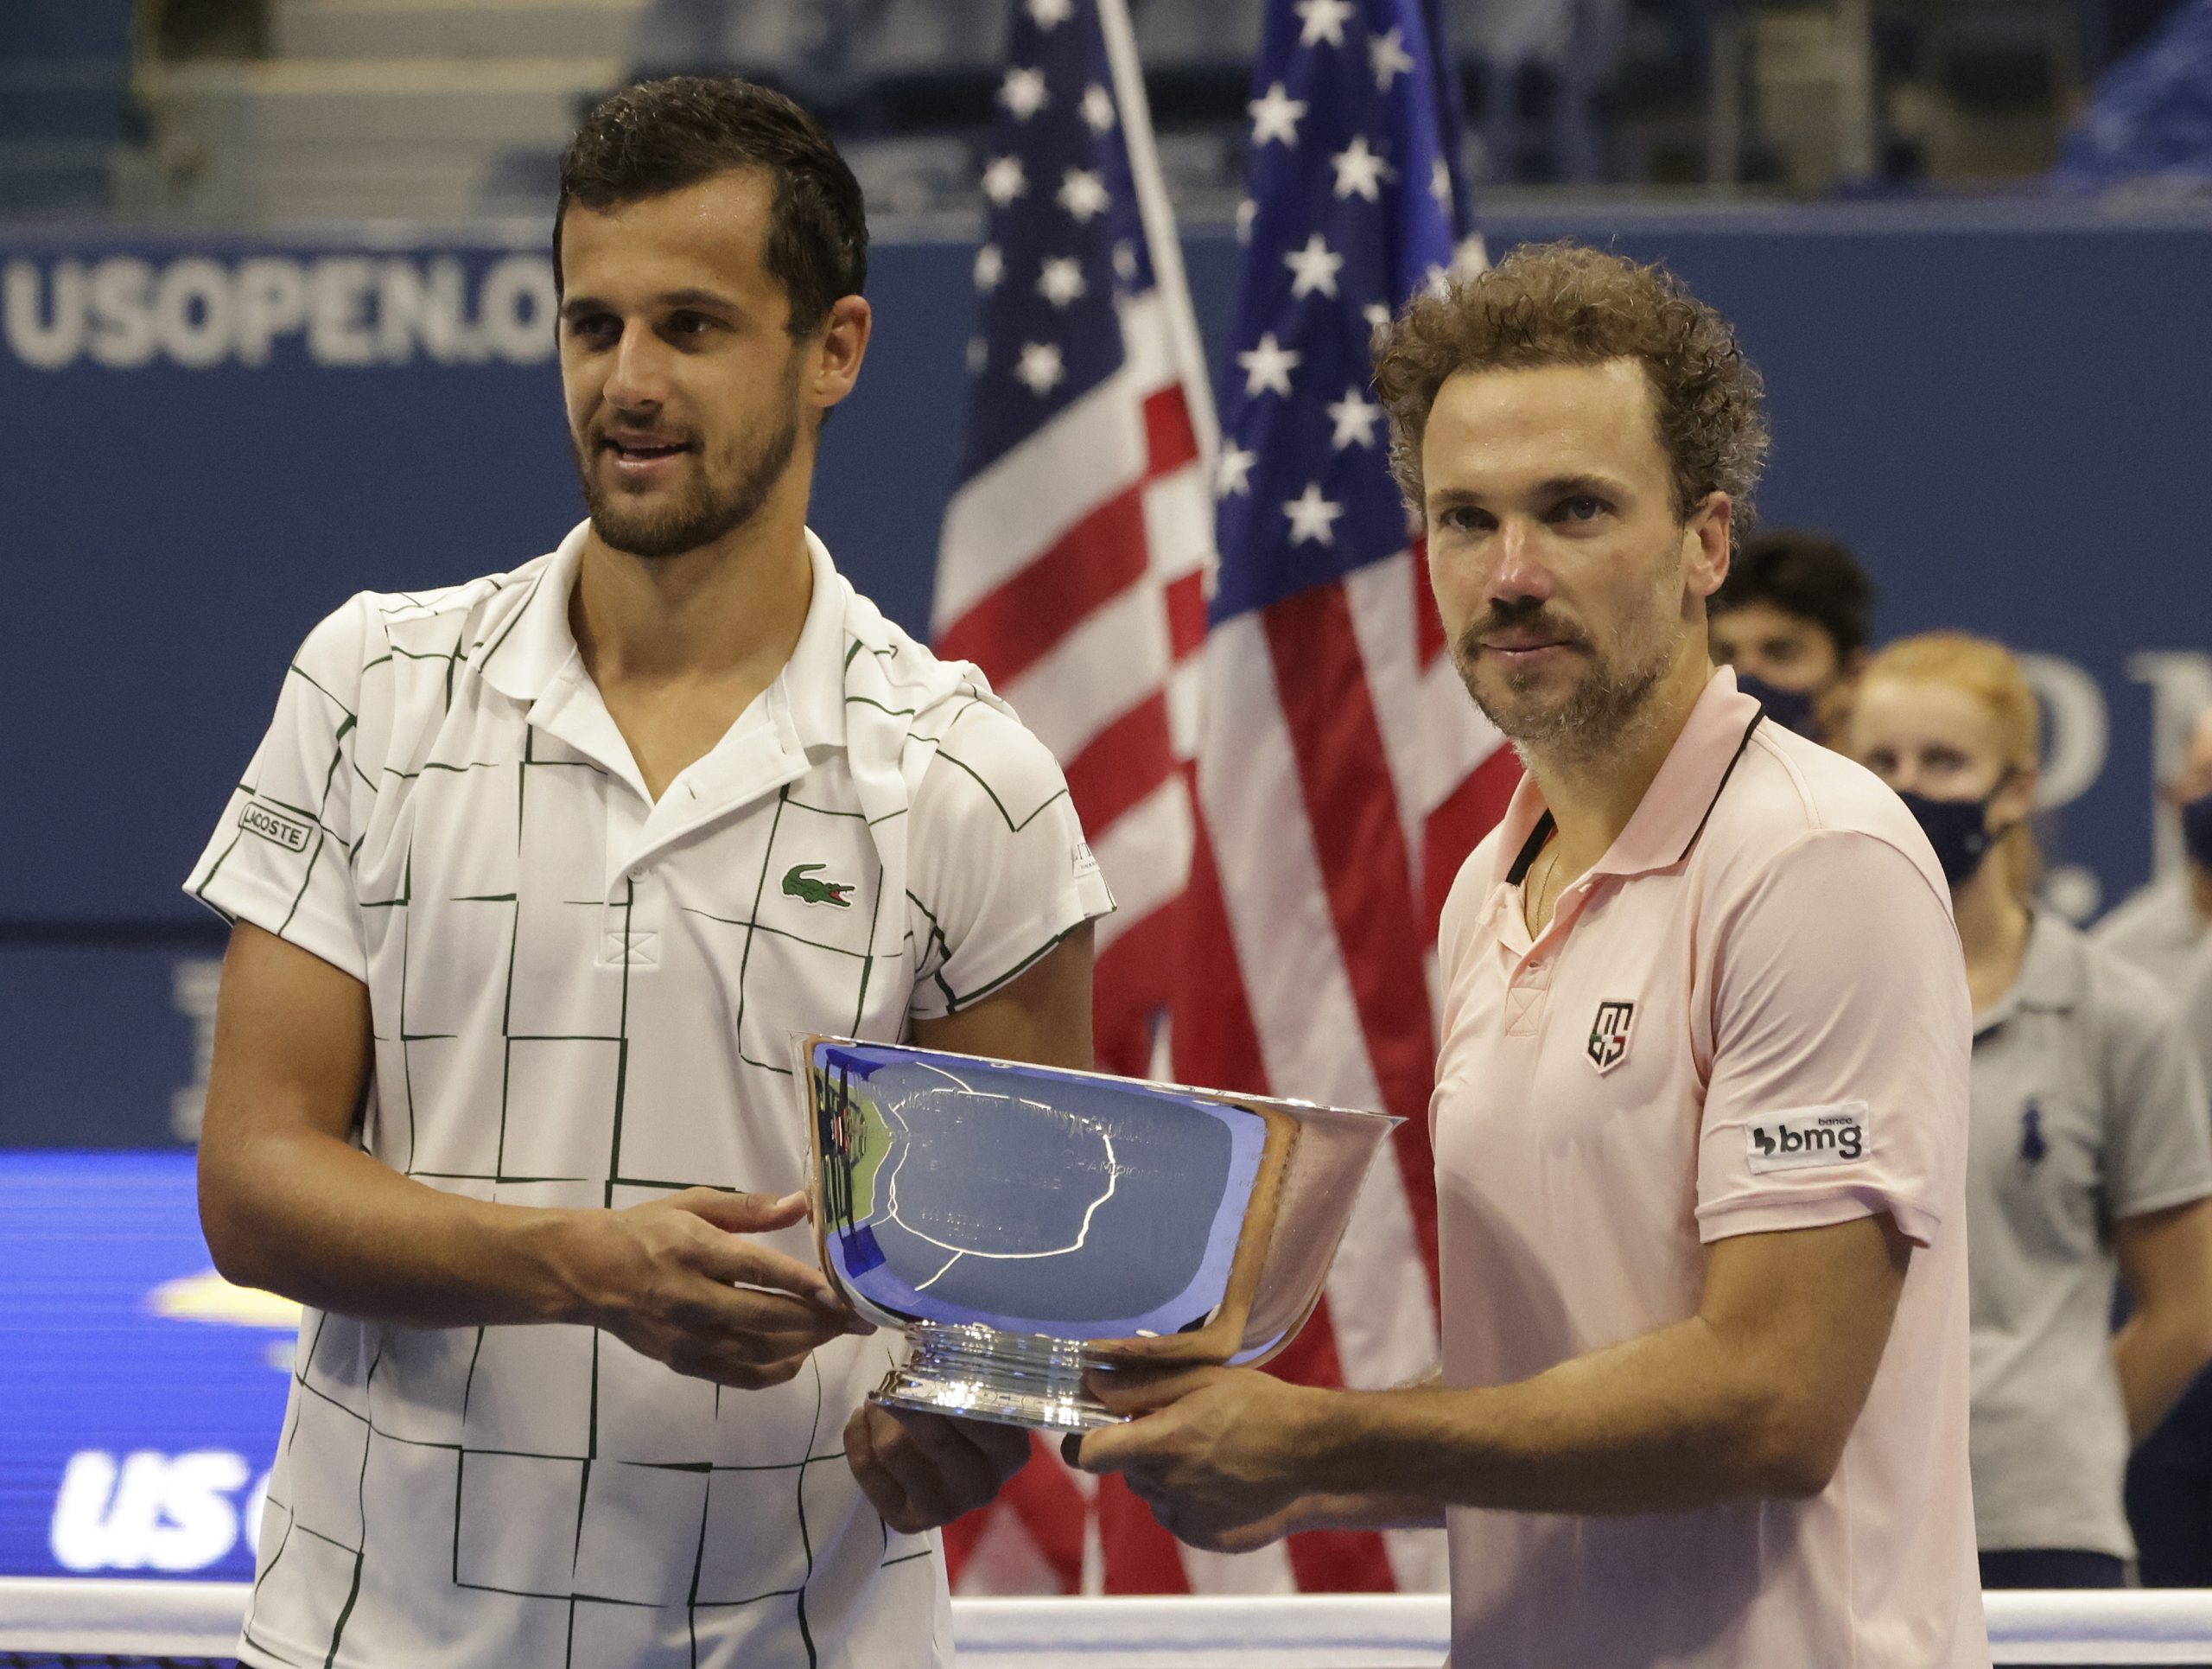 epa08660063 Mate Pavic of Croatia (L) and Bruno Soares of Brazil (R) celebrate with the Championship Trophy after defeating Wesley Koolhof of the Netherlands and Nikola Mektic of Croatia in the men's doubles final match on the eleventh day of the US Open Tennis Championships the USTA National Tennis Center in Flushing Meadows, New York, USA, 10 September 2020. Due to the coronavirus pandemic, the US Open is being played without fans and runs from 31 August through 13 September.  EPA/JASON SZENES